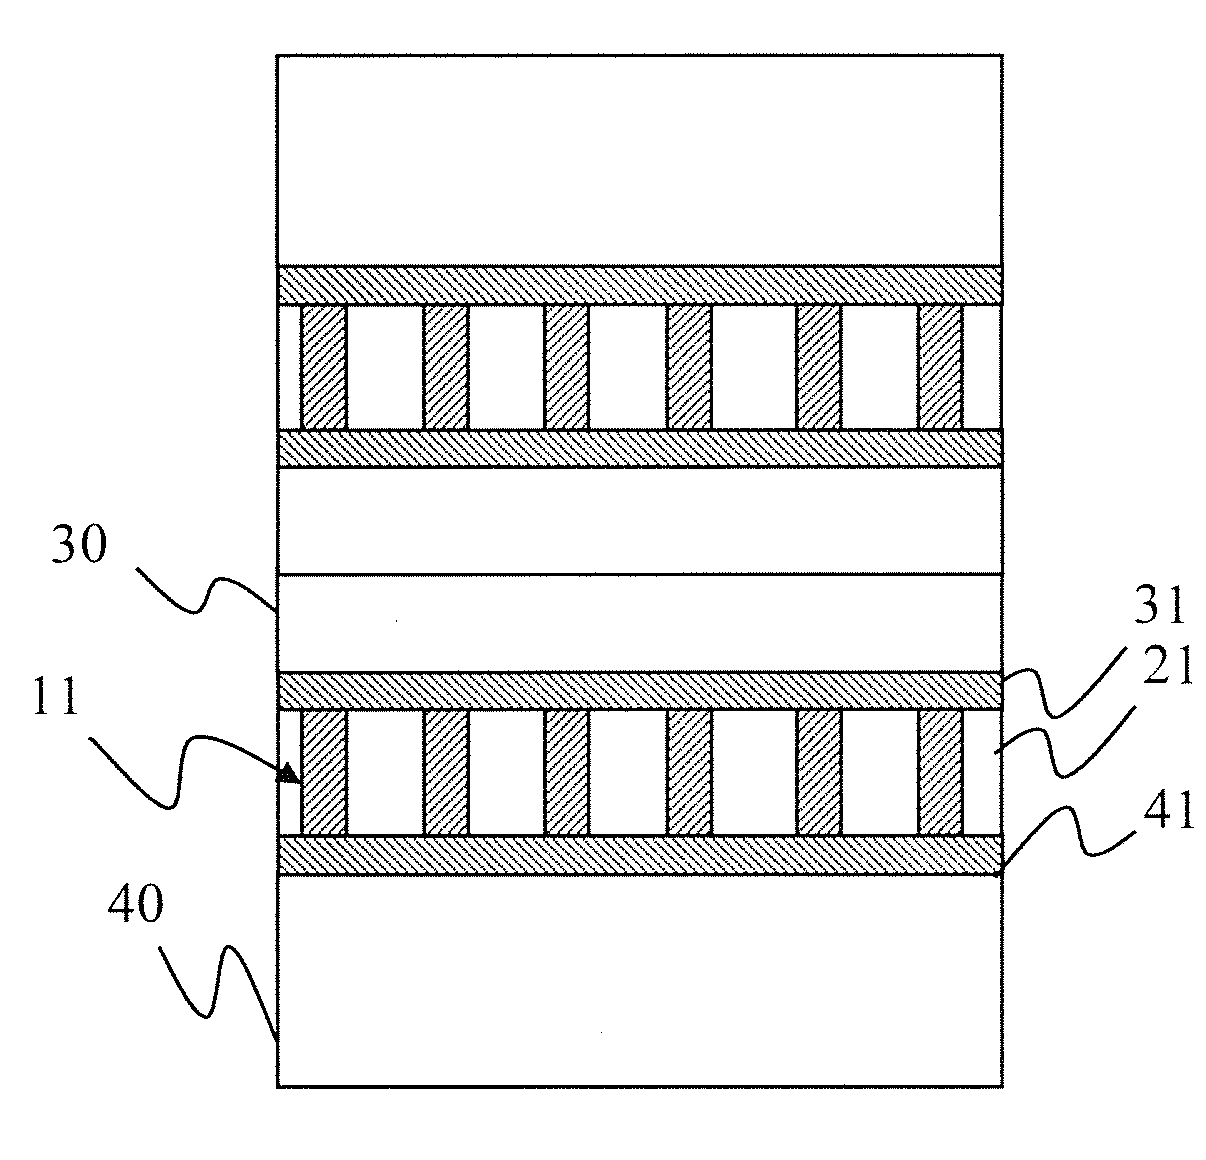 Micro/nanostructure pn junction diode array thin-film solar cell and method for fabricating the same